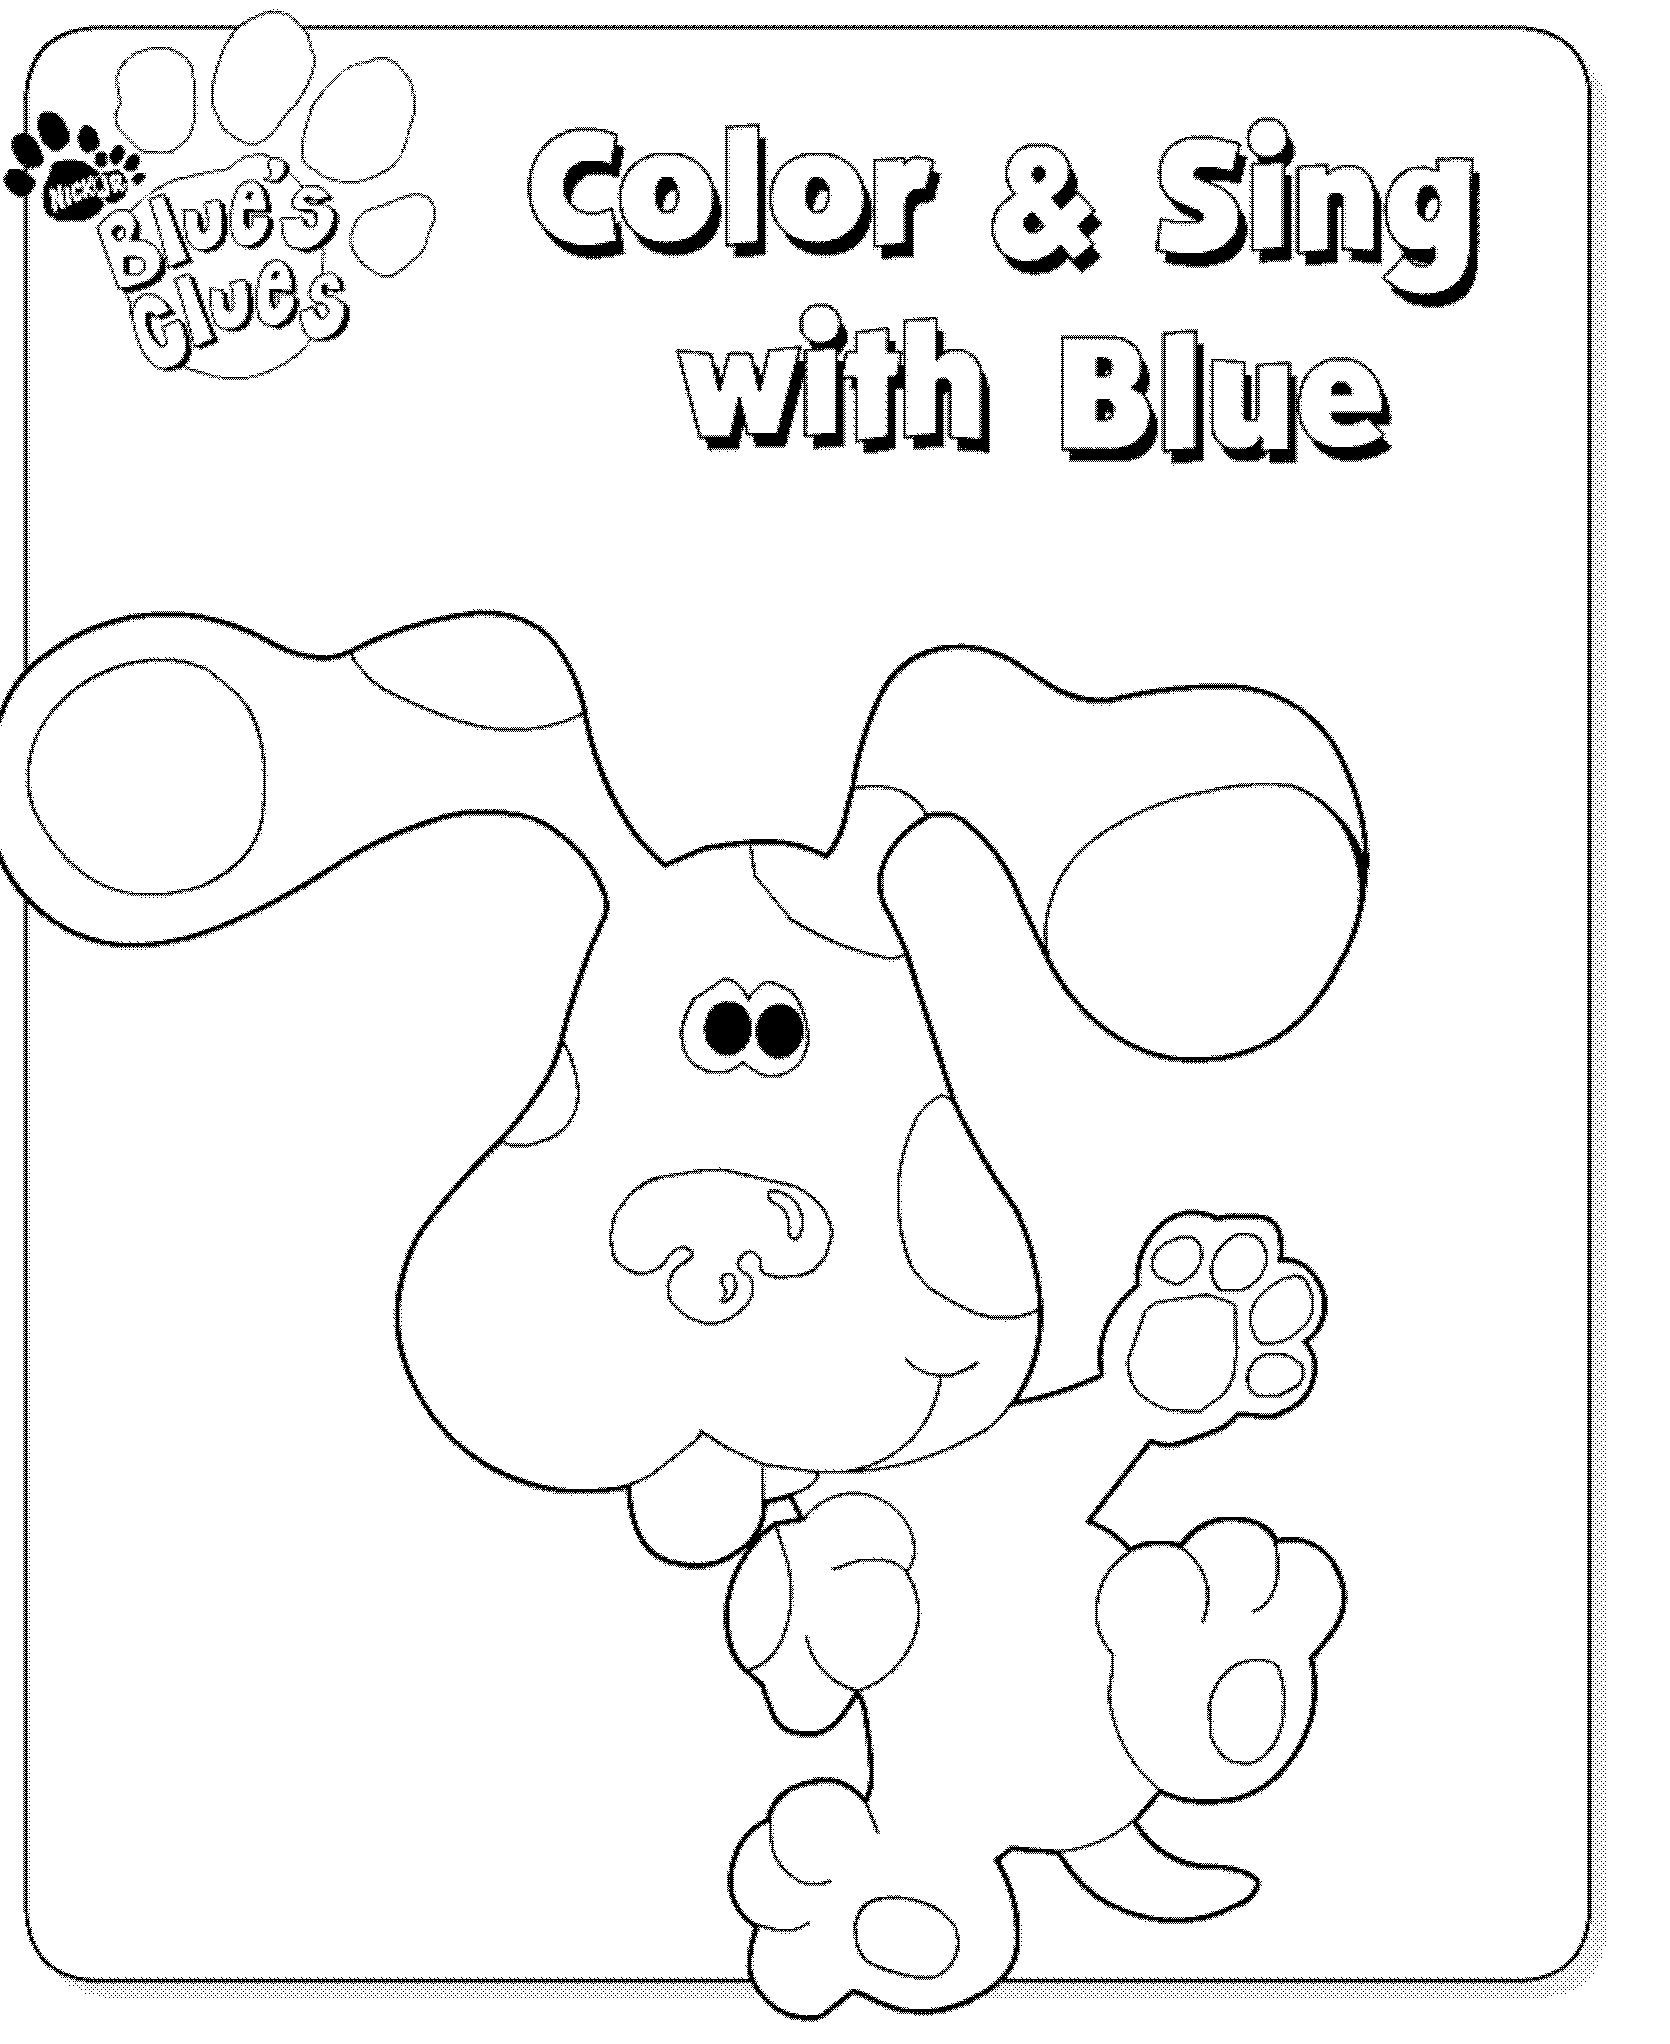 15 coloring pages of Blues Clues